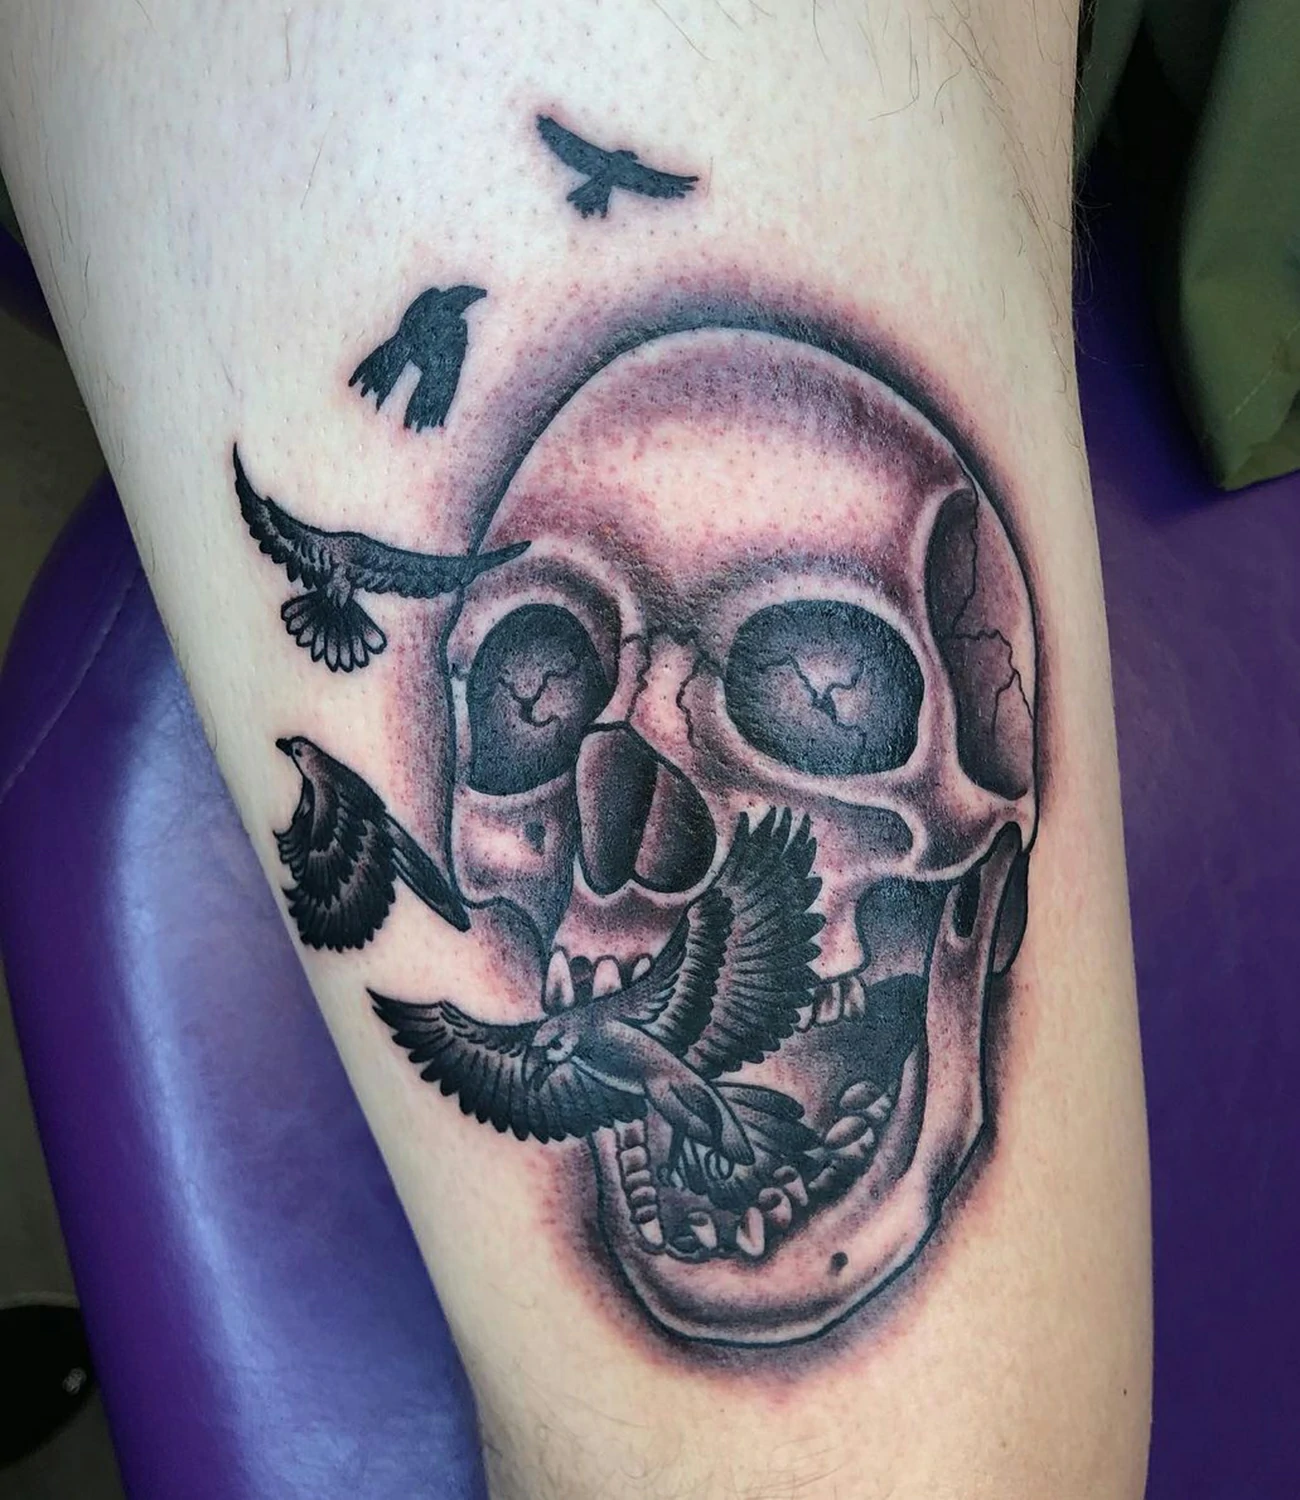 Raven and skull tattoo: An artistic tattoo that features both a raven and a skull.